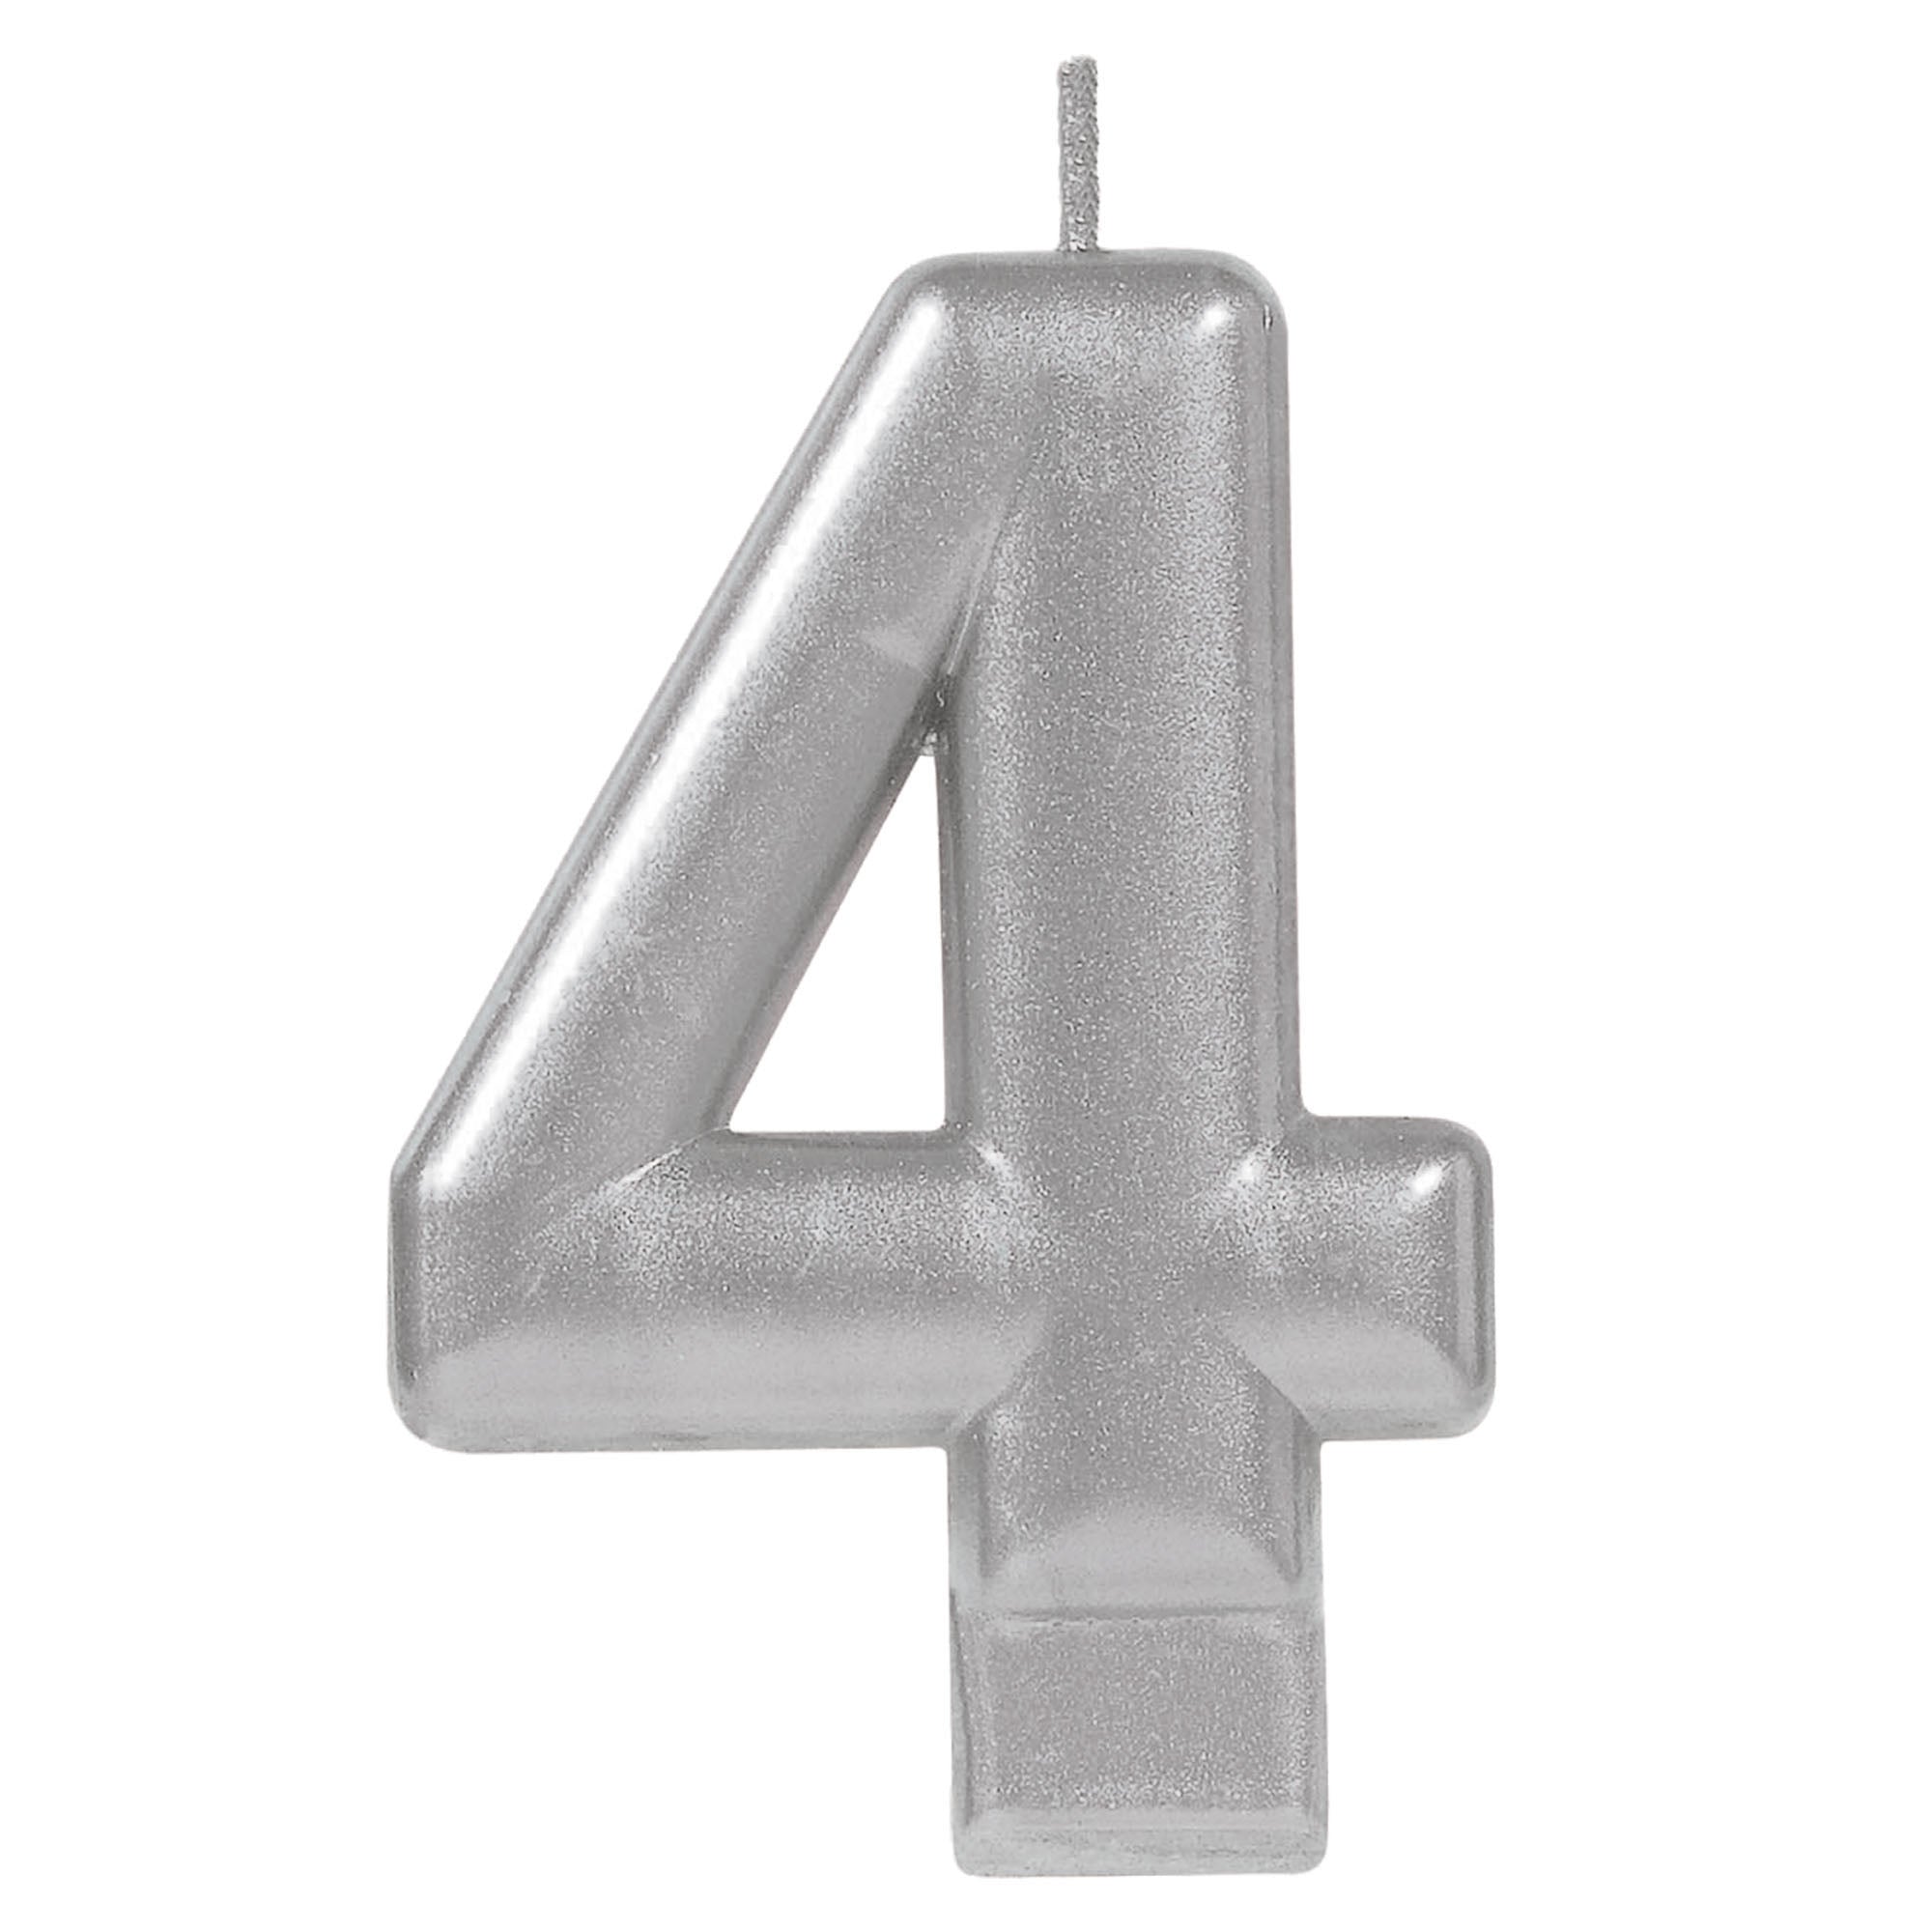 Numeral Candle 4 Silver Metallic  3.25in